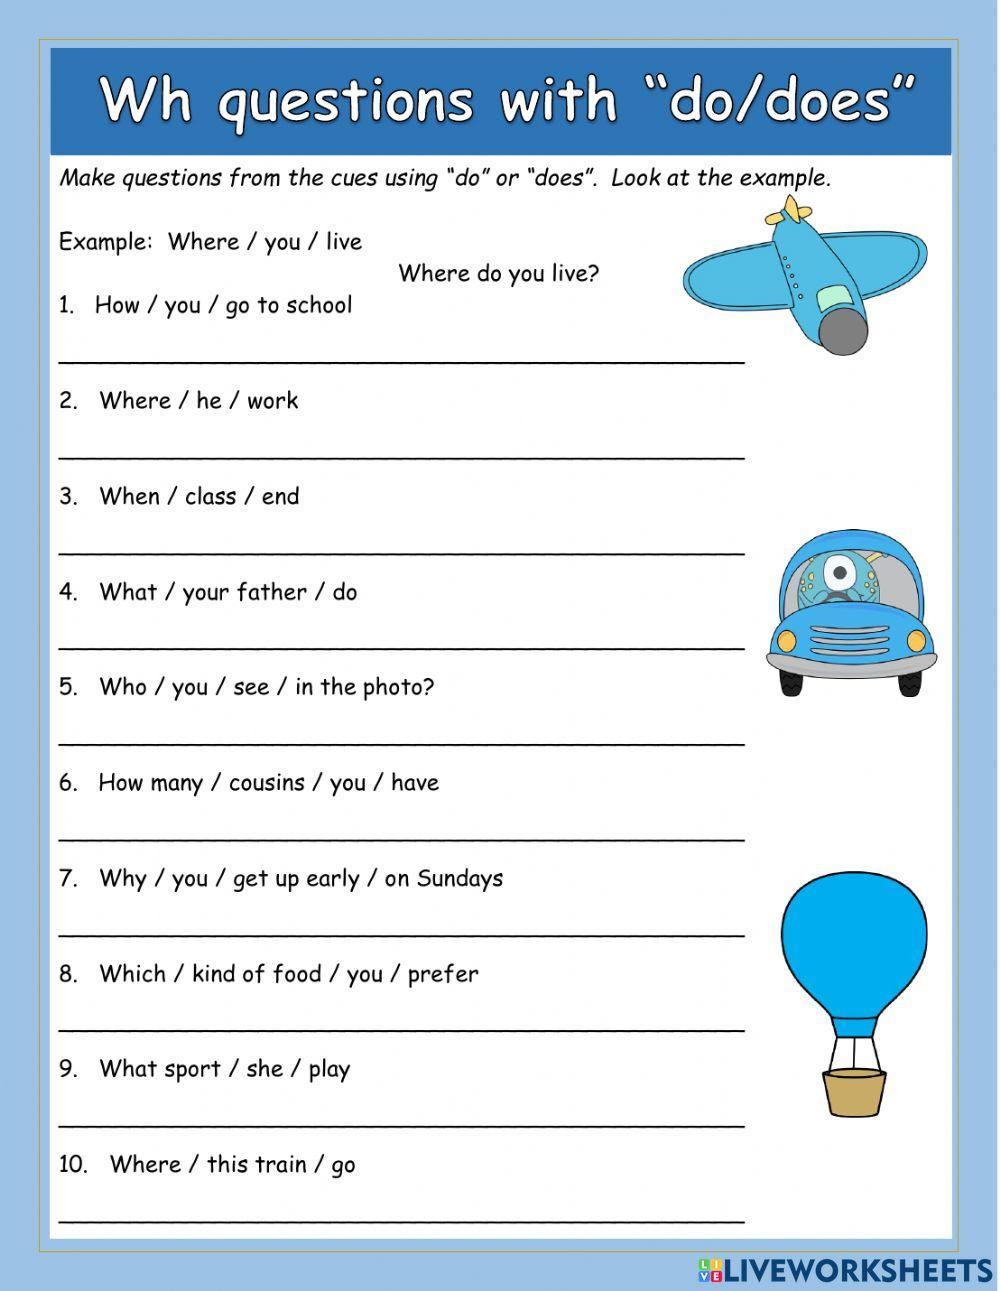 Wh-questions Worksheets For 4th Grade - Your Home Teacher